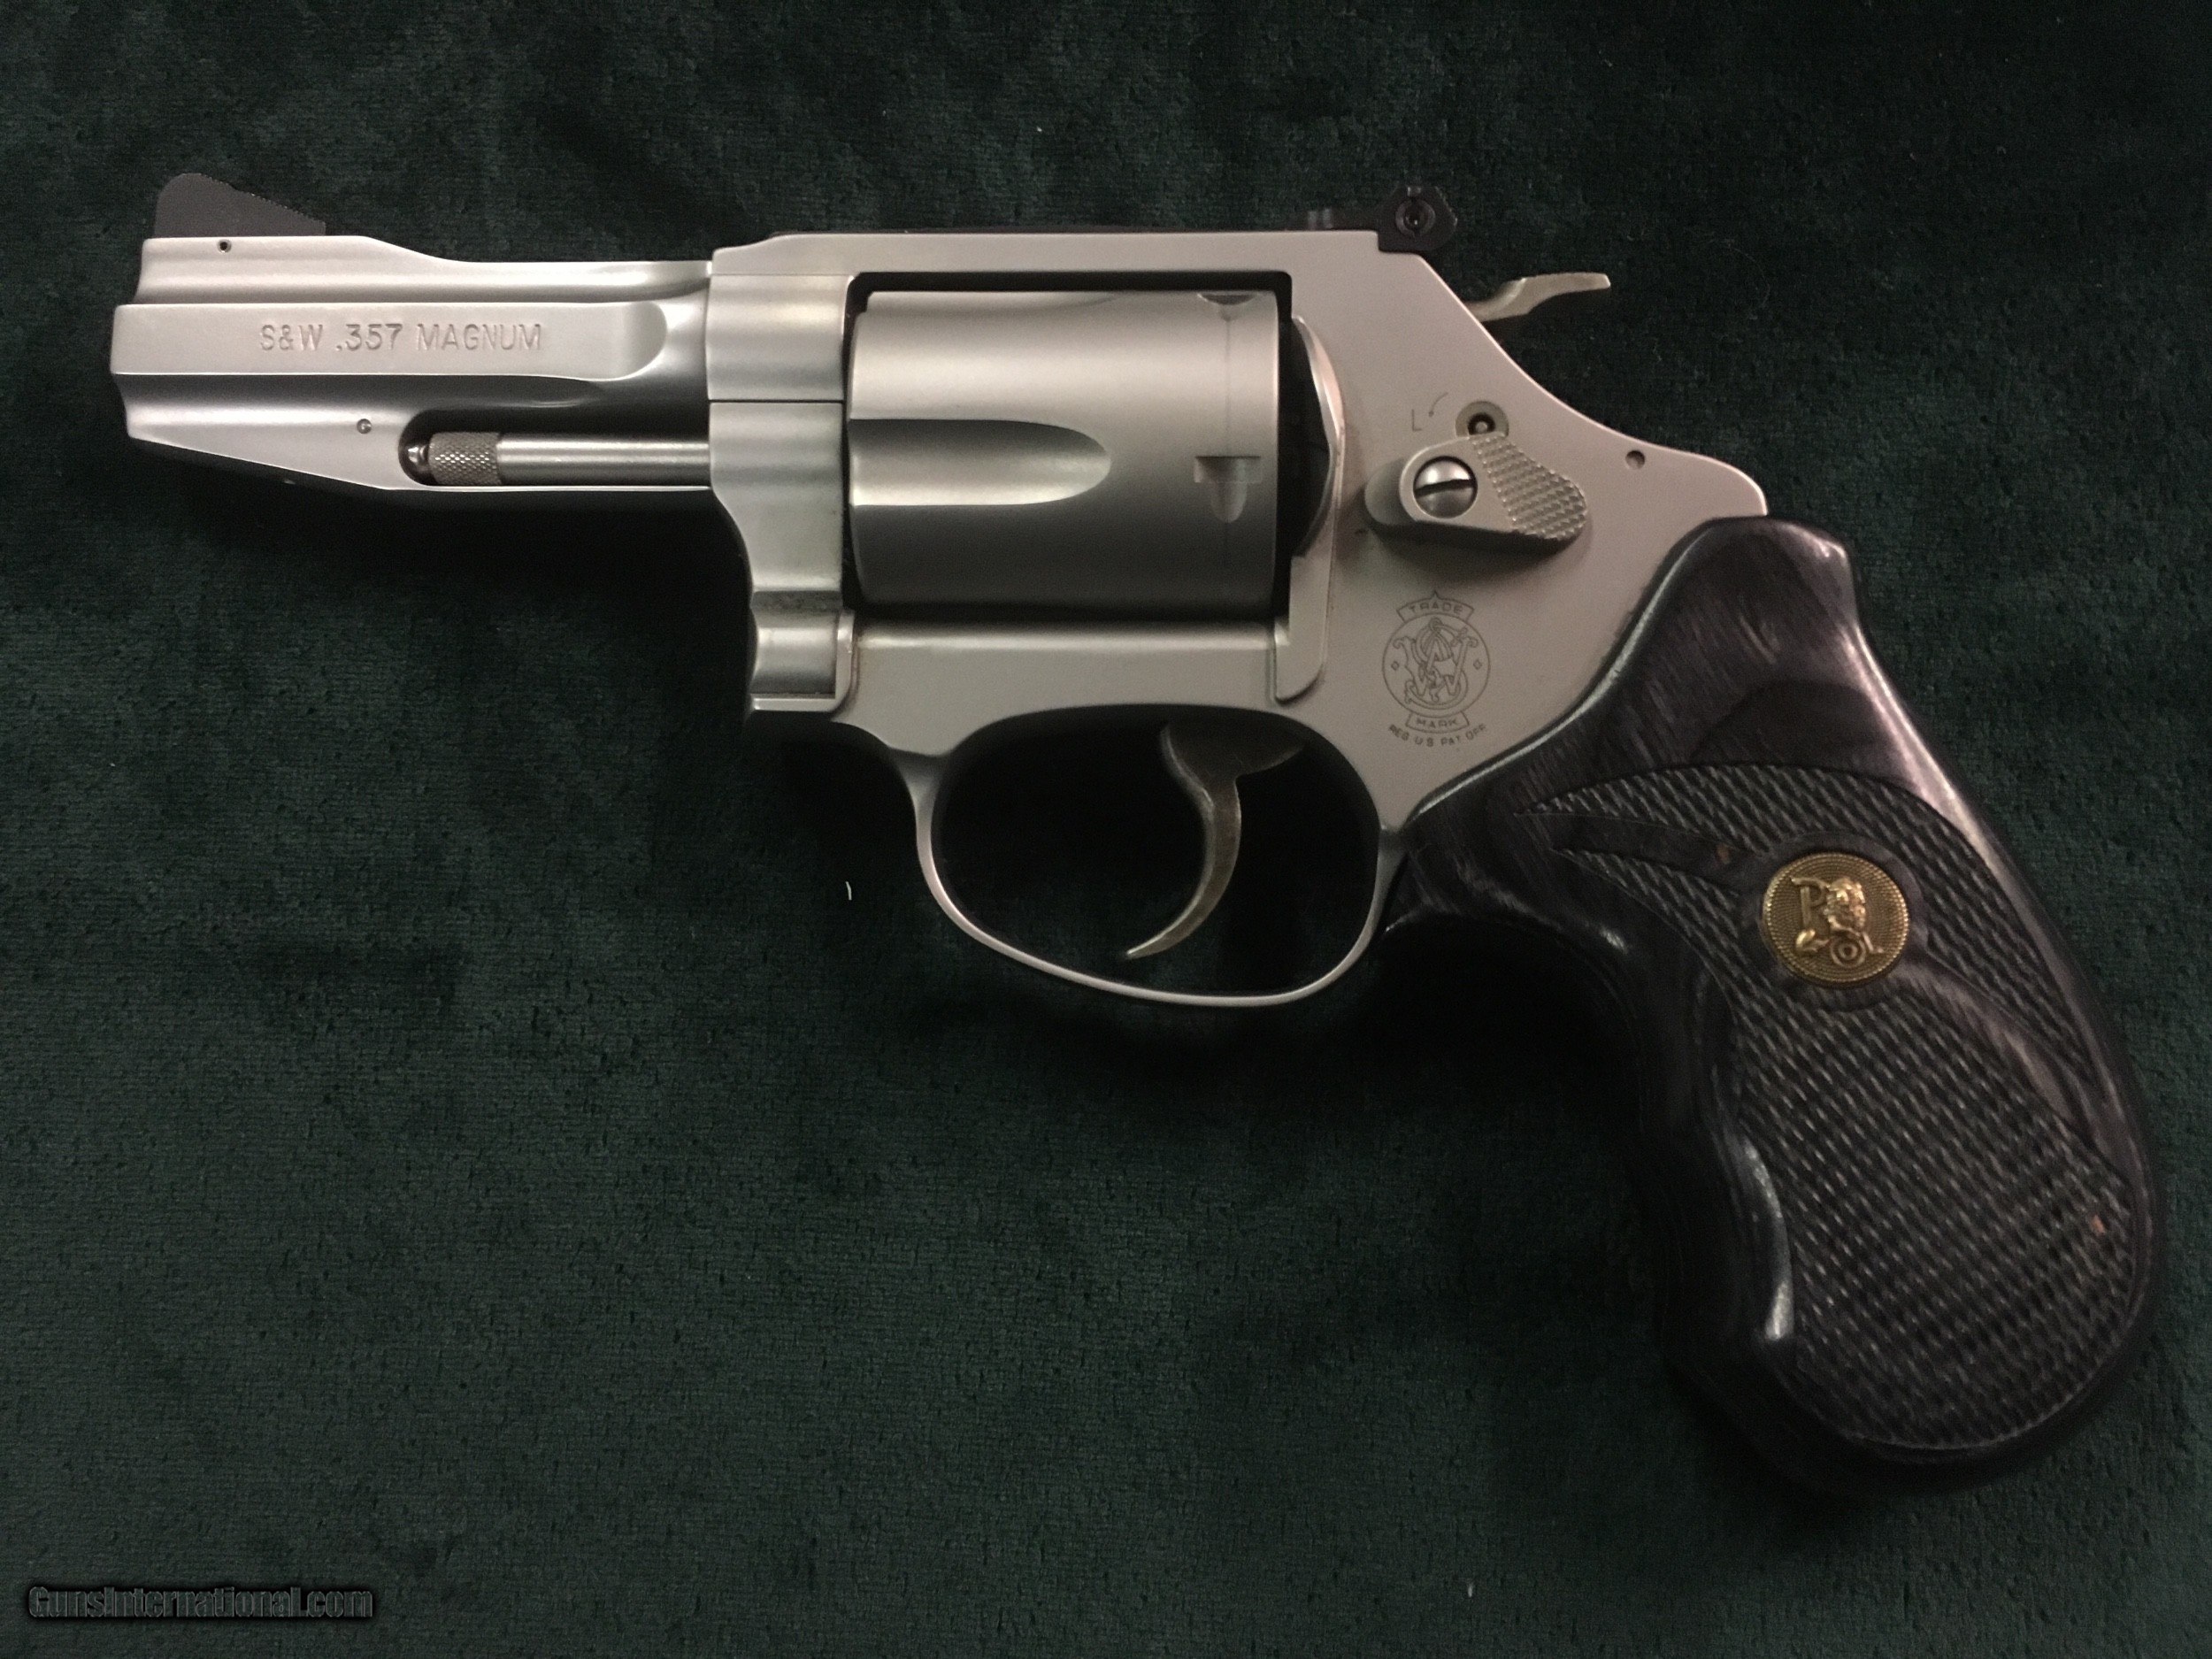 Smith And Wesson 357 Revolver Model 60 15 Pro Series